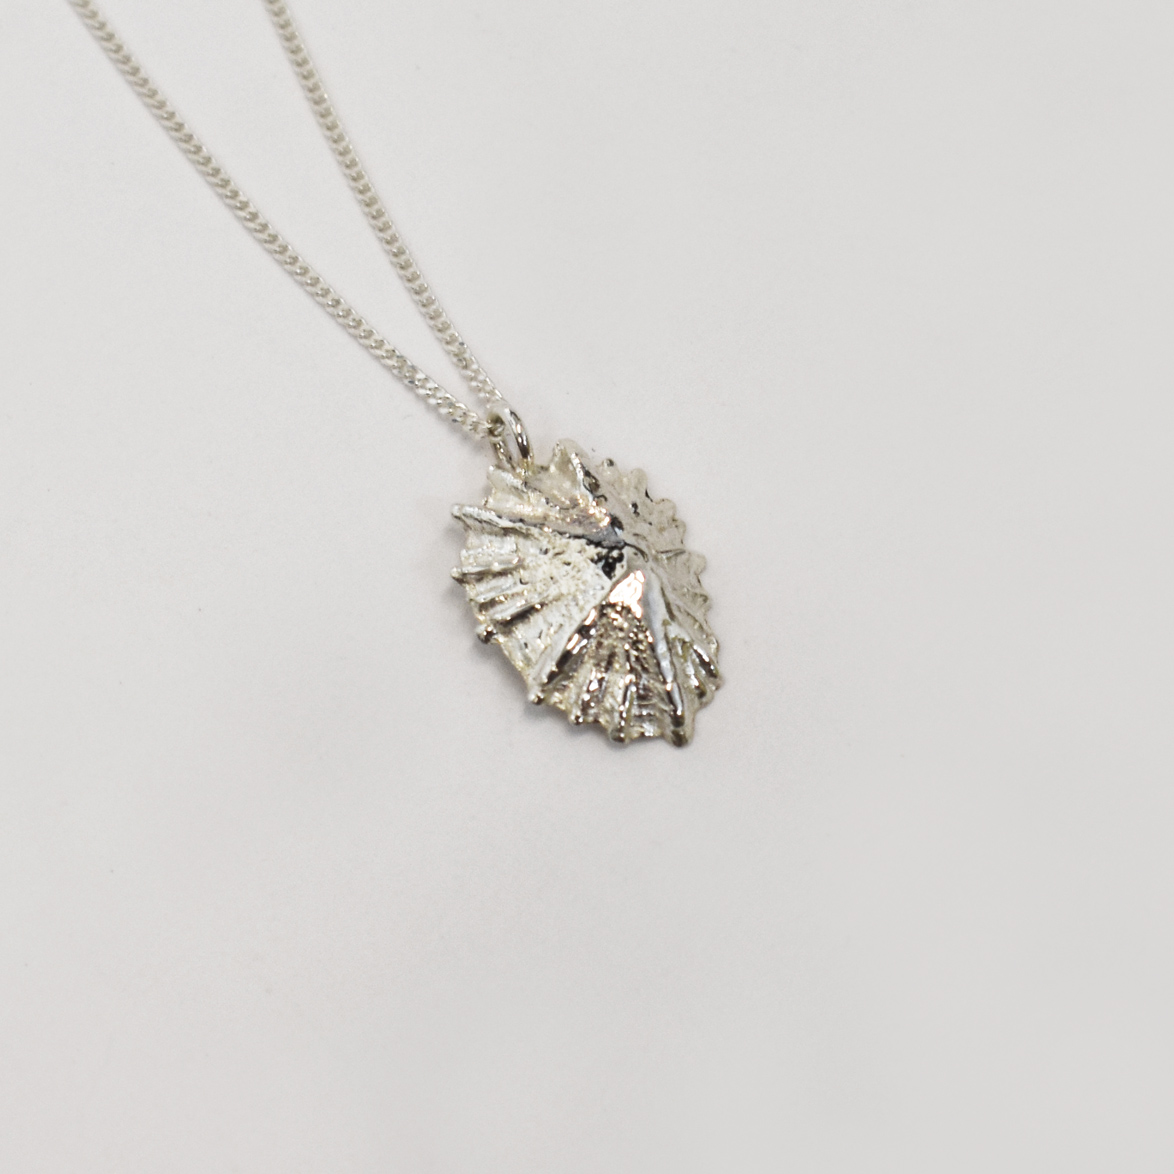 Silver Limpet Shell Necklace